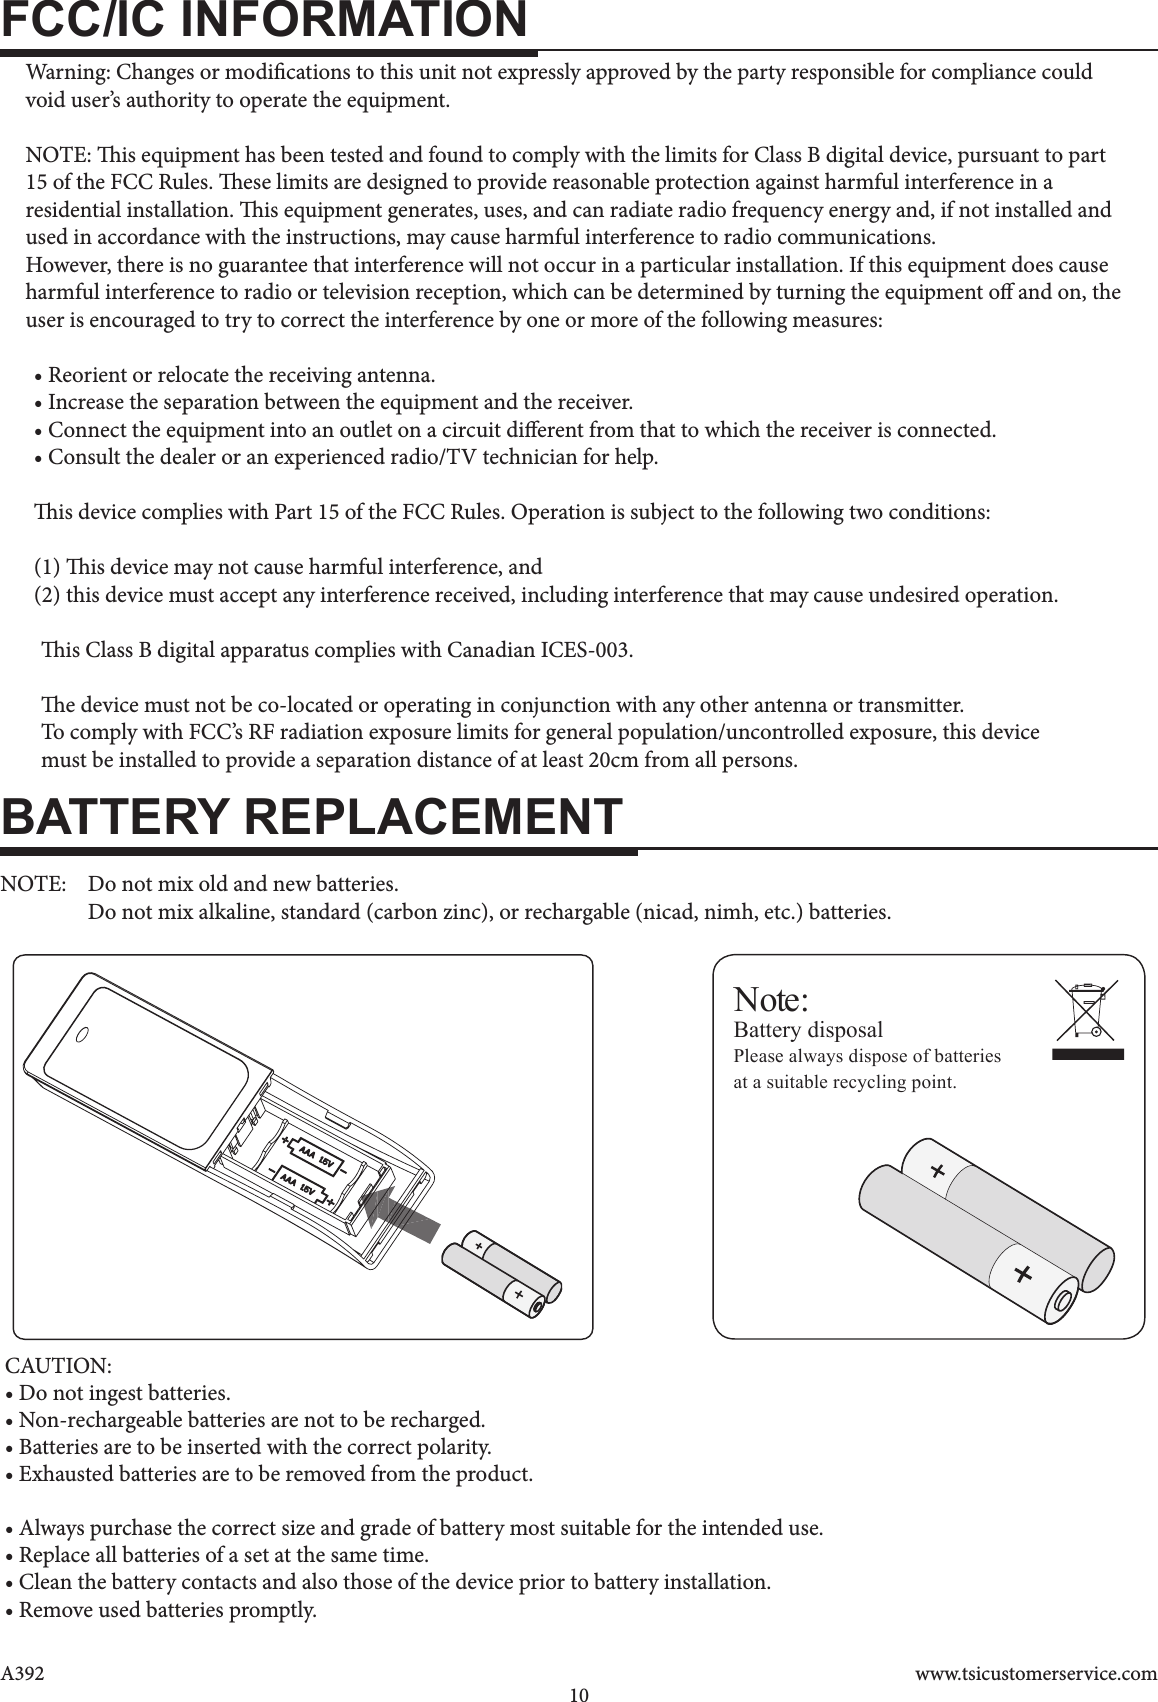 www.tsicustomerservice.comA39210FCC/IC INFORMATIONBATTERY REPLACEMENTNote:Battery disposalPlease always dispose of batteriesat a suitable recycling point.       Warning: Changes or modications to this unit not expressly approved by the party responsible for compliance could     void user’s authority to operate the equipment.    NOTE: is equipment has been tested and found to comply with the limits for Class B digital device, pursuant to part     15 of the FCC Rules. ese limits are designed to provide reasonable protection against harmful interference in a     residential installation. is equipment generates, uses, and can radiate radio frequency energy and, if not installed and     used in accordance with the instructions, may cause harmful interference to radio communications.     However, there is no guarantee that interference will not occur in a particular installation. If this equipment does cause    harmful interference to radio or television reception, which can be determined by turning the equipment o and on, the      user is encouraged to try to correct the interference by one or more of the following measures:  • Reorient or relocate the receiving antenna.  • Increase the separation between the equipment and the receiver.  • Connect the equipment into an outlet on a circuit dierent from that to which the receiver is connected.  • Consult the dealer or an experienced radio/TV technician for help.   is device complies with Part 15 of the FCC Rules. Operation is subject to the following two conditions:   (1) is device may not cause harmful interference, and  (2) this device must accept any interference received, including interference that may cause undesired operation.        is Class B digital apparatus complies with Canadian ICES-003.       e device must not be co-located or operating in conjunction with any other antenna or transmitter.       To comply with FCC’s RF radiation exposure limits for general population/uncontrolled exposure, this device        must be installed to provide a separation distance of at least 20cm from all persons.NOTE:  Do not mix old and new batteries.  Do not mix alkaline, standard (carbon zinc), or rechargable (nicad, nimh, etc.) batteries.       CAUTION:• Do not ingest batteries.• Non-rechargeable batteries are not to be recharged.• Batteries are to be inserted with the correct polarity.• Exhausted batteries are to be removed from the product.• Always purchase the correct size and grade of battery most suitable for the intended use.• Replace all batteries of a set at the same time.• Clean the battery contacts and also those of the device prior to battery installation.• Remove used batteries promptly.